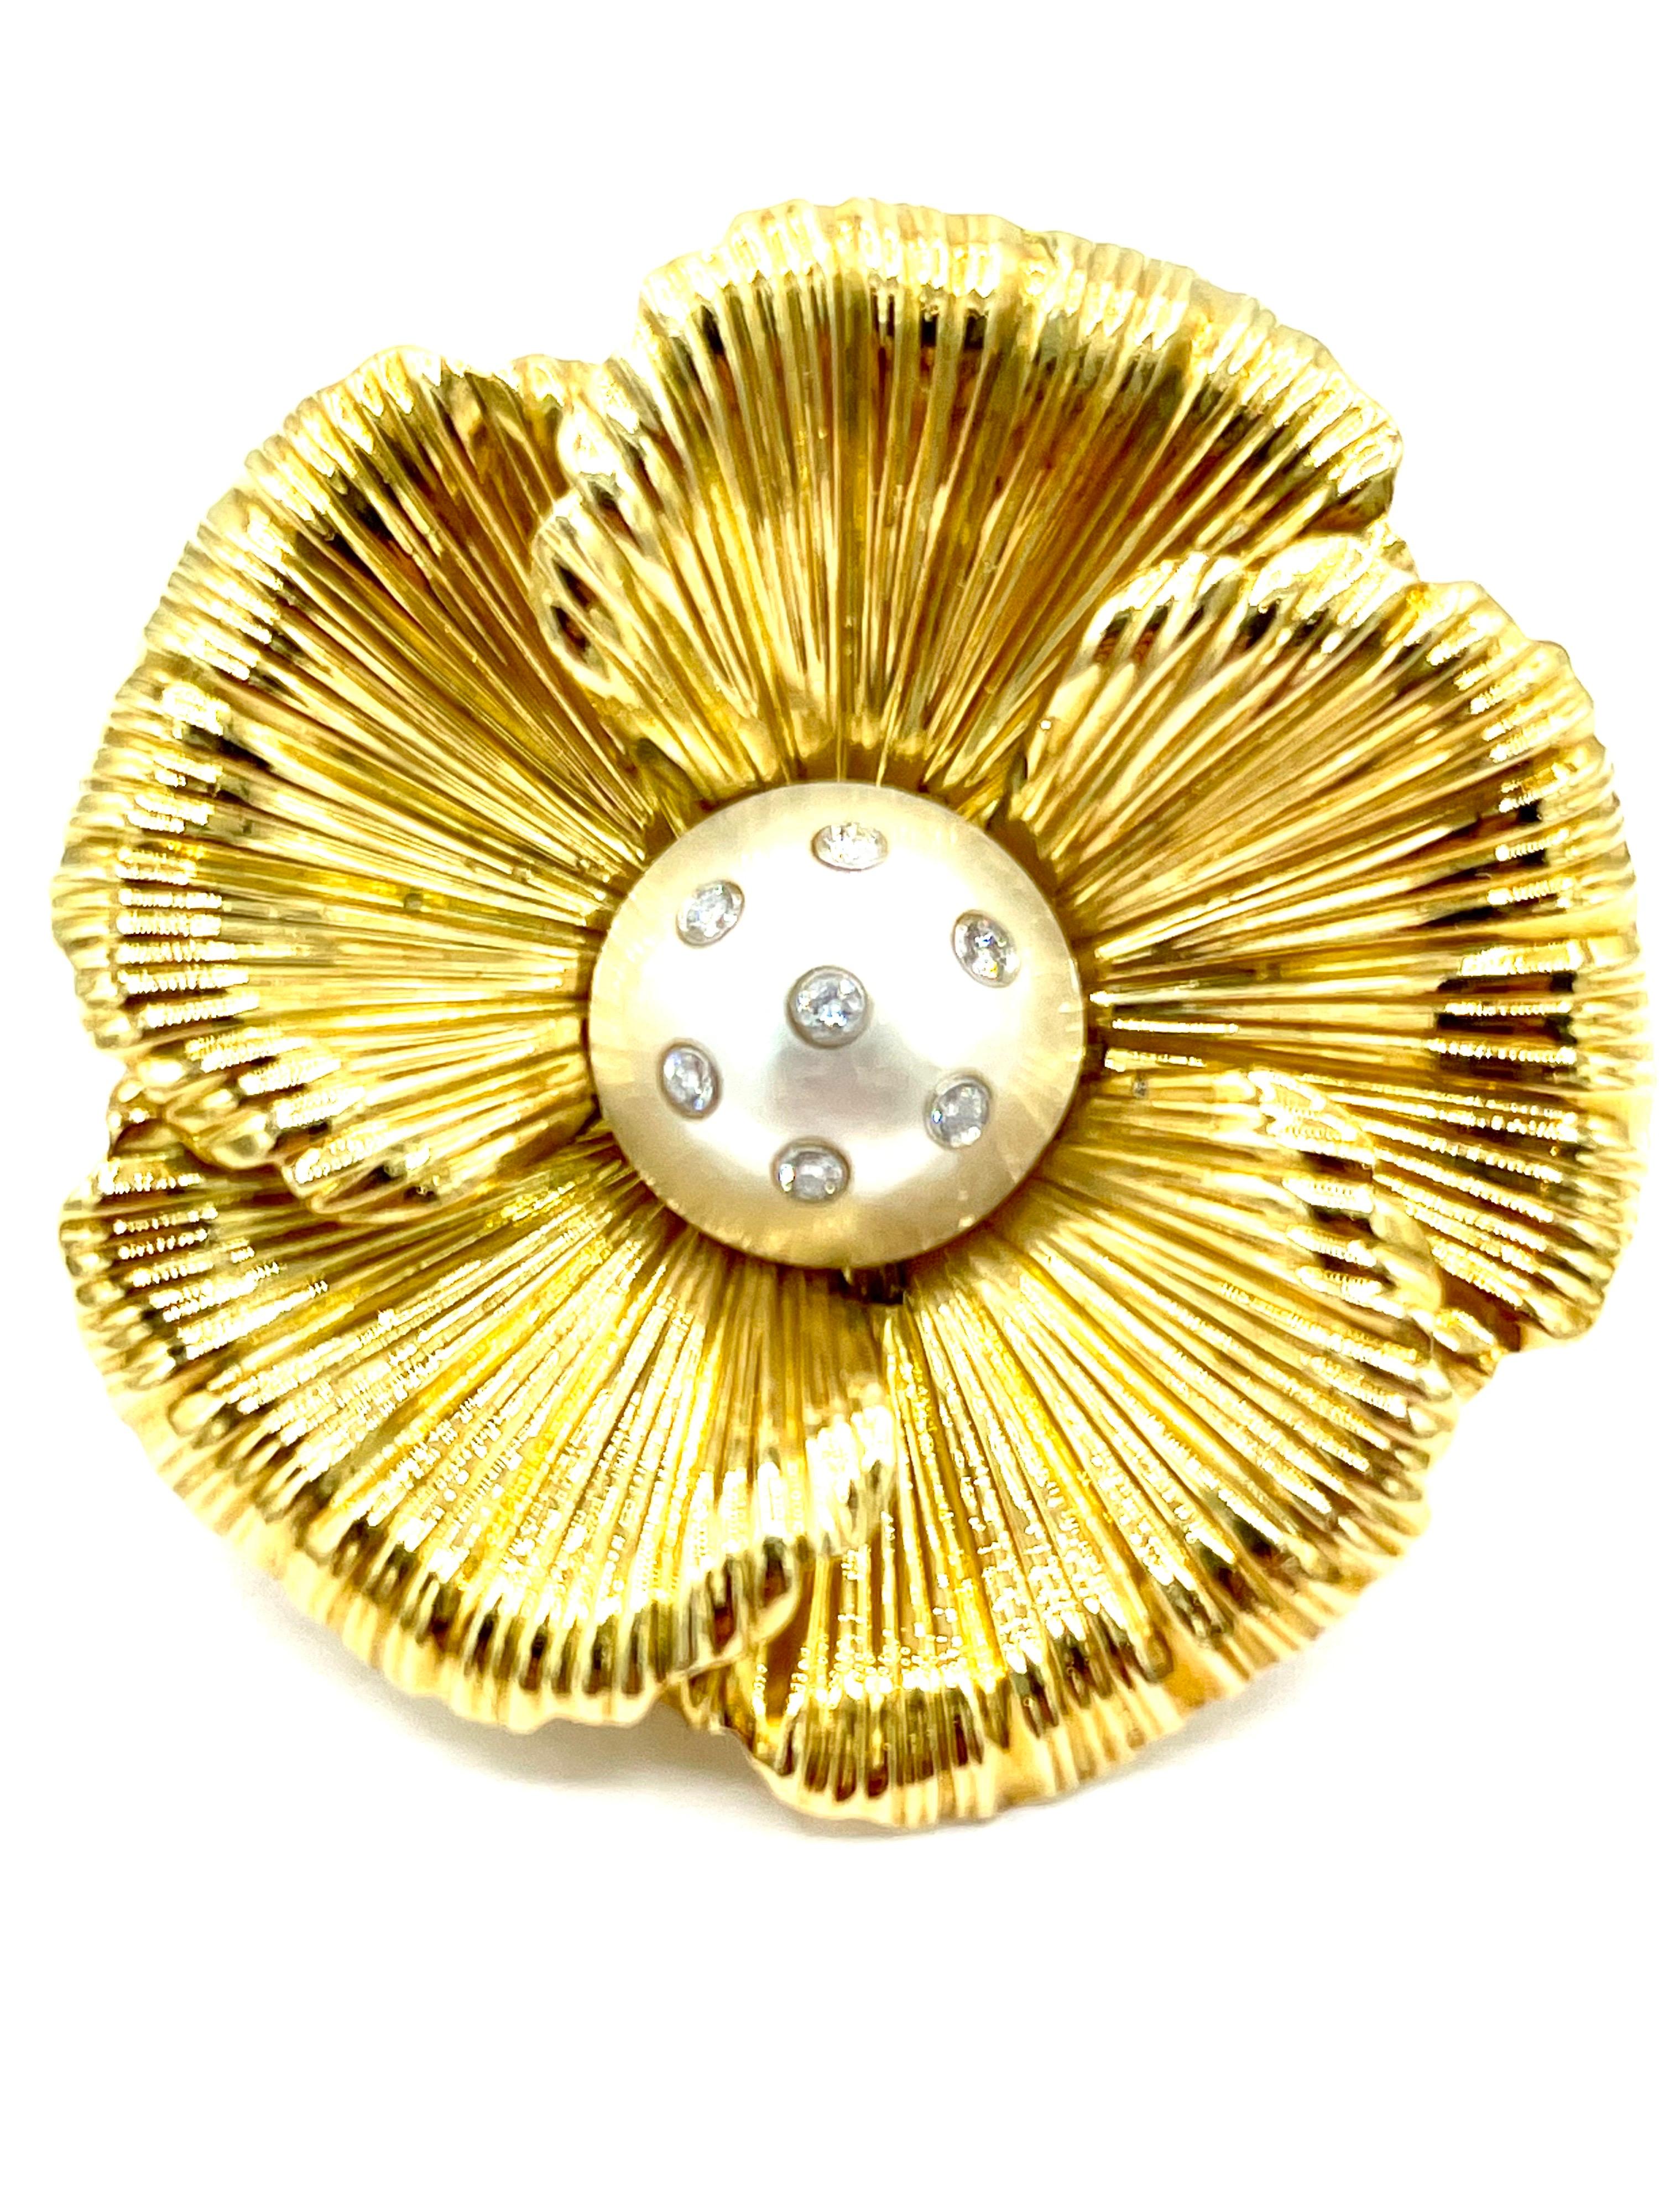 A simple and gorgeous flower brooch.  The brooch has a center Mabe Pearl set with seven round brilliant Diamonds bezel set into the pearl itself.  The petals are made in 18K textured yellow gold with hints of yellow popping through.  The Diamonds